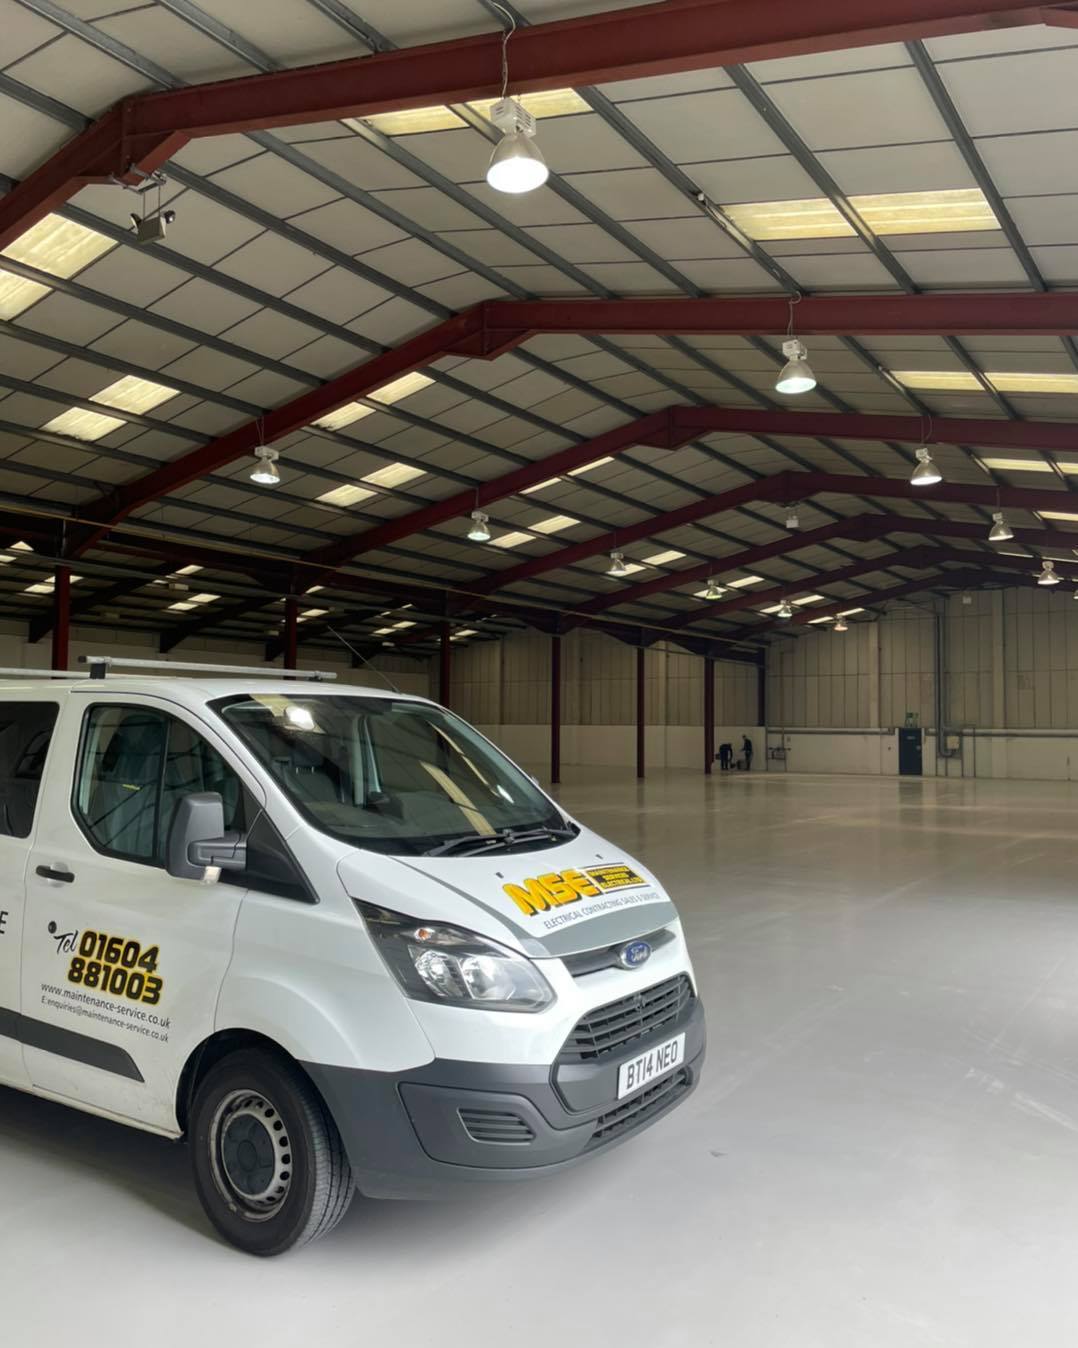 led lighting in a warehouse in Castleform, North Yorkshire